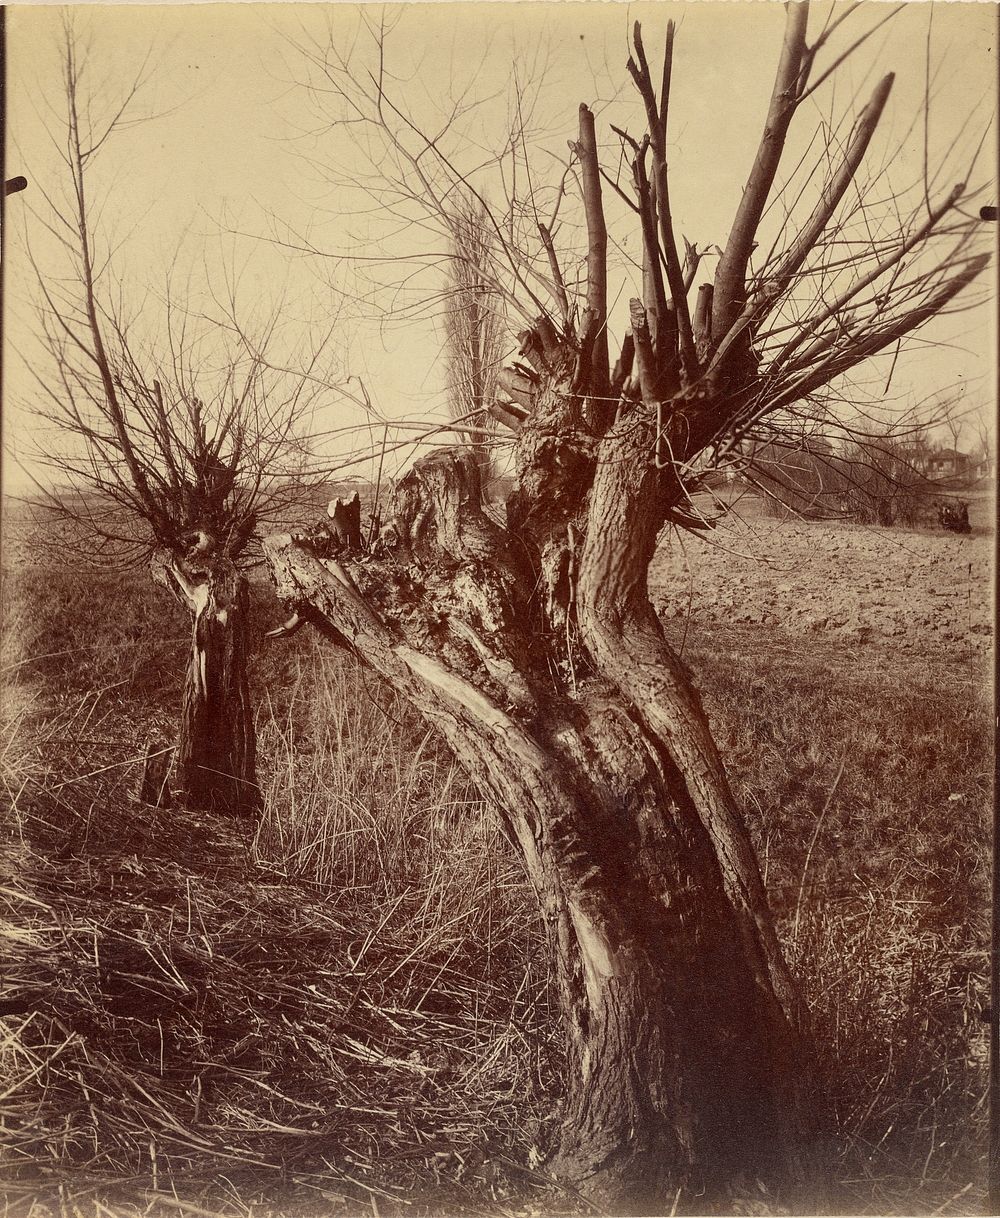 Saules (Willows) by Eugène Atget